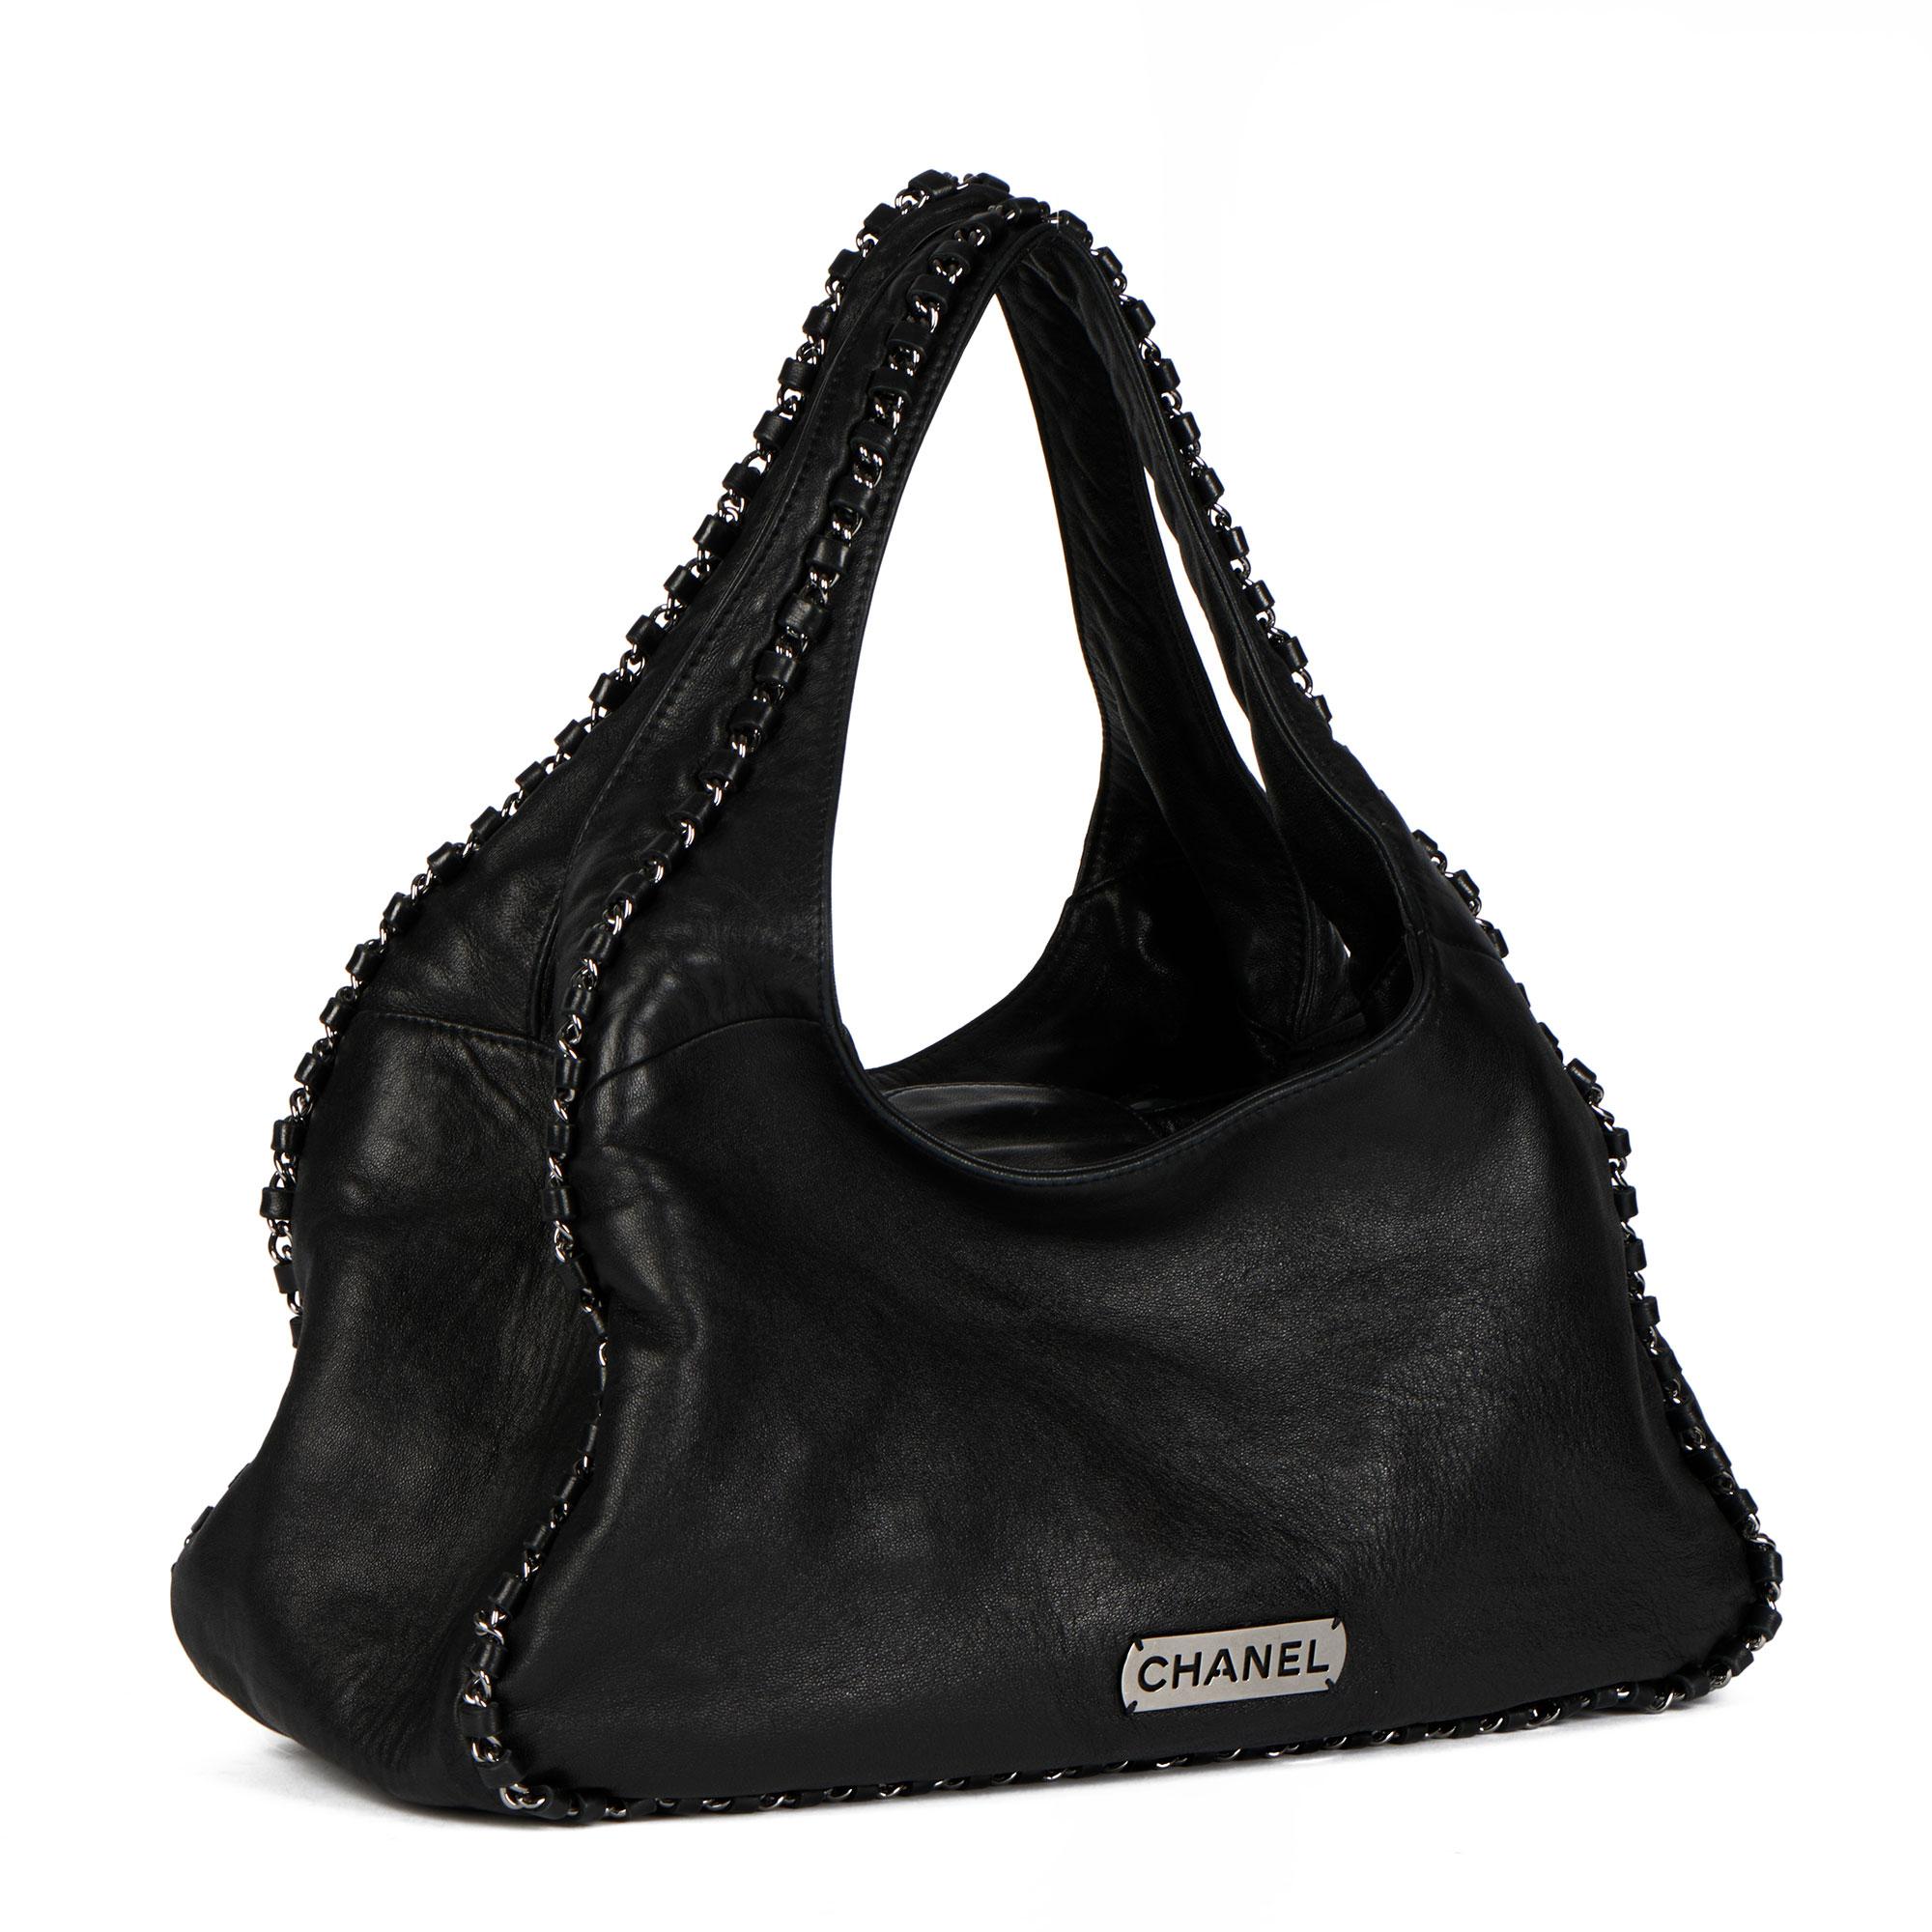 CHANEL
Black Goatskin Chain Around Hobo Bag

Serial Number: 9076967
Age (Circa): 2005
Authenticity Details: Serial Sticker (Made in France)
Gender: Ladies
Type: Shoulder, Tote

Colour: Black
Hardware: Silver
Material(s): Goatskin Leather
Interior: